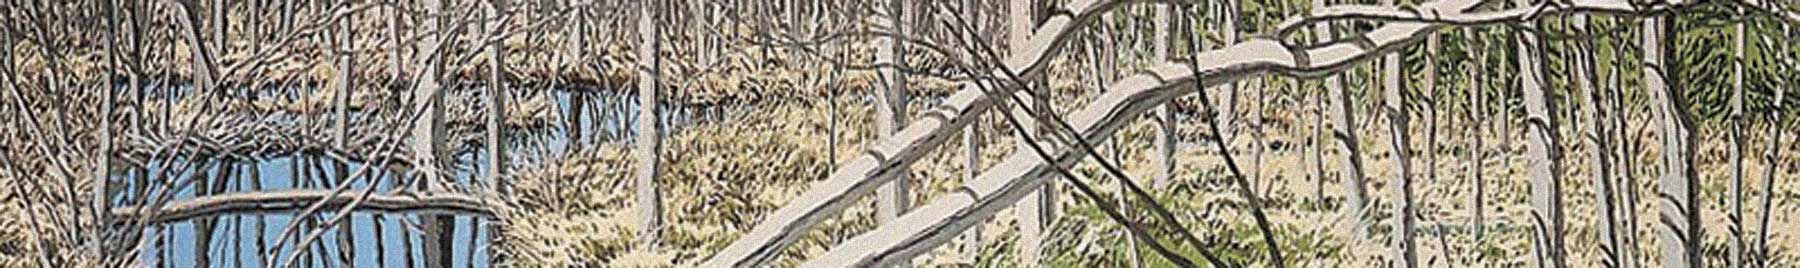 Detail from painting Sky in Cora’s Marsh by Neil Welliver, depicting a marshy area with a stand of young trees.